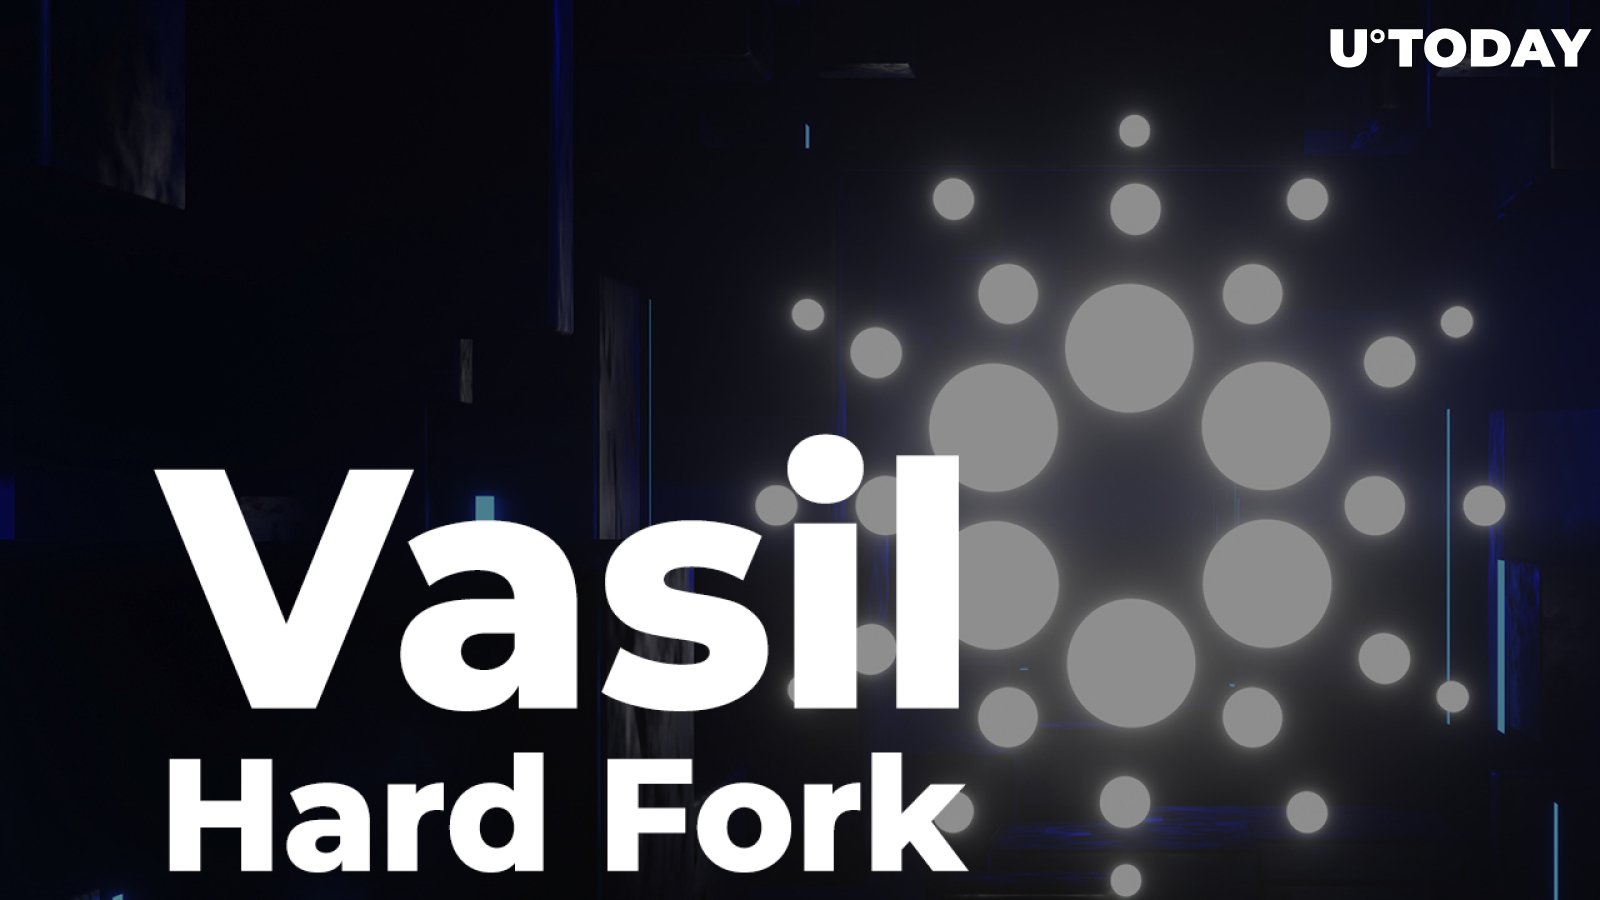 Cardano Founder: Vasil Hard Fork on Track, Testnet Set to Launch by End of May